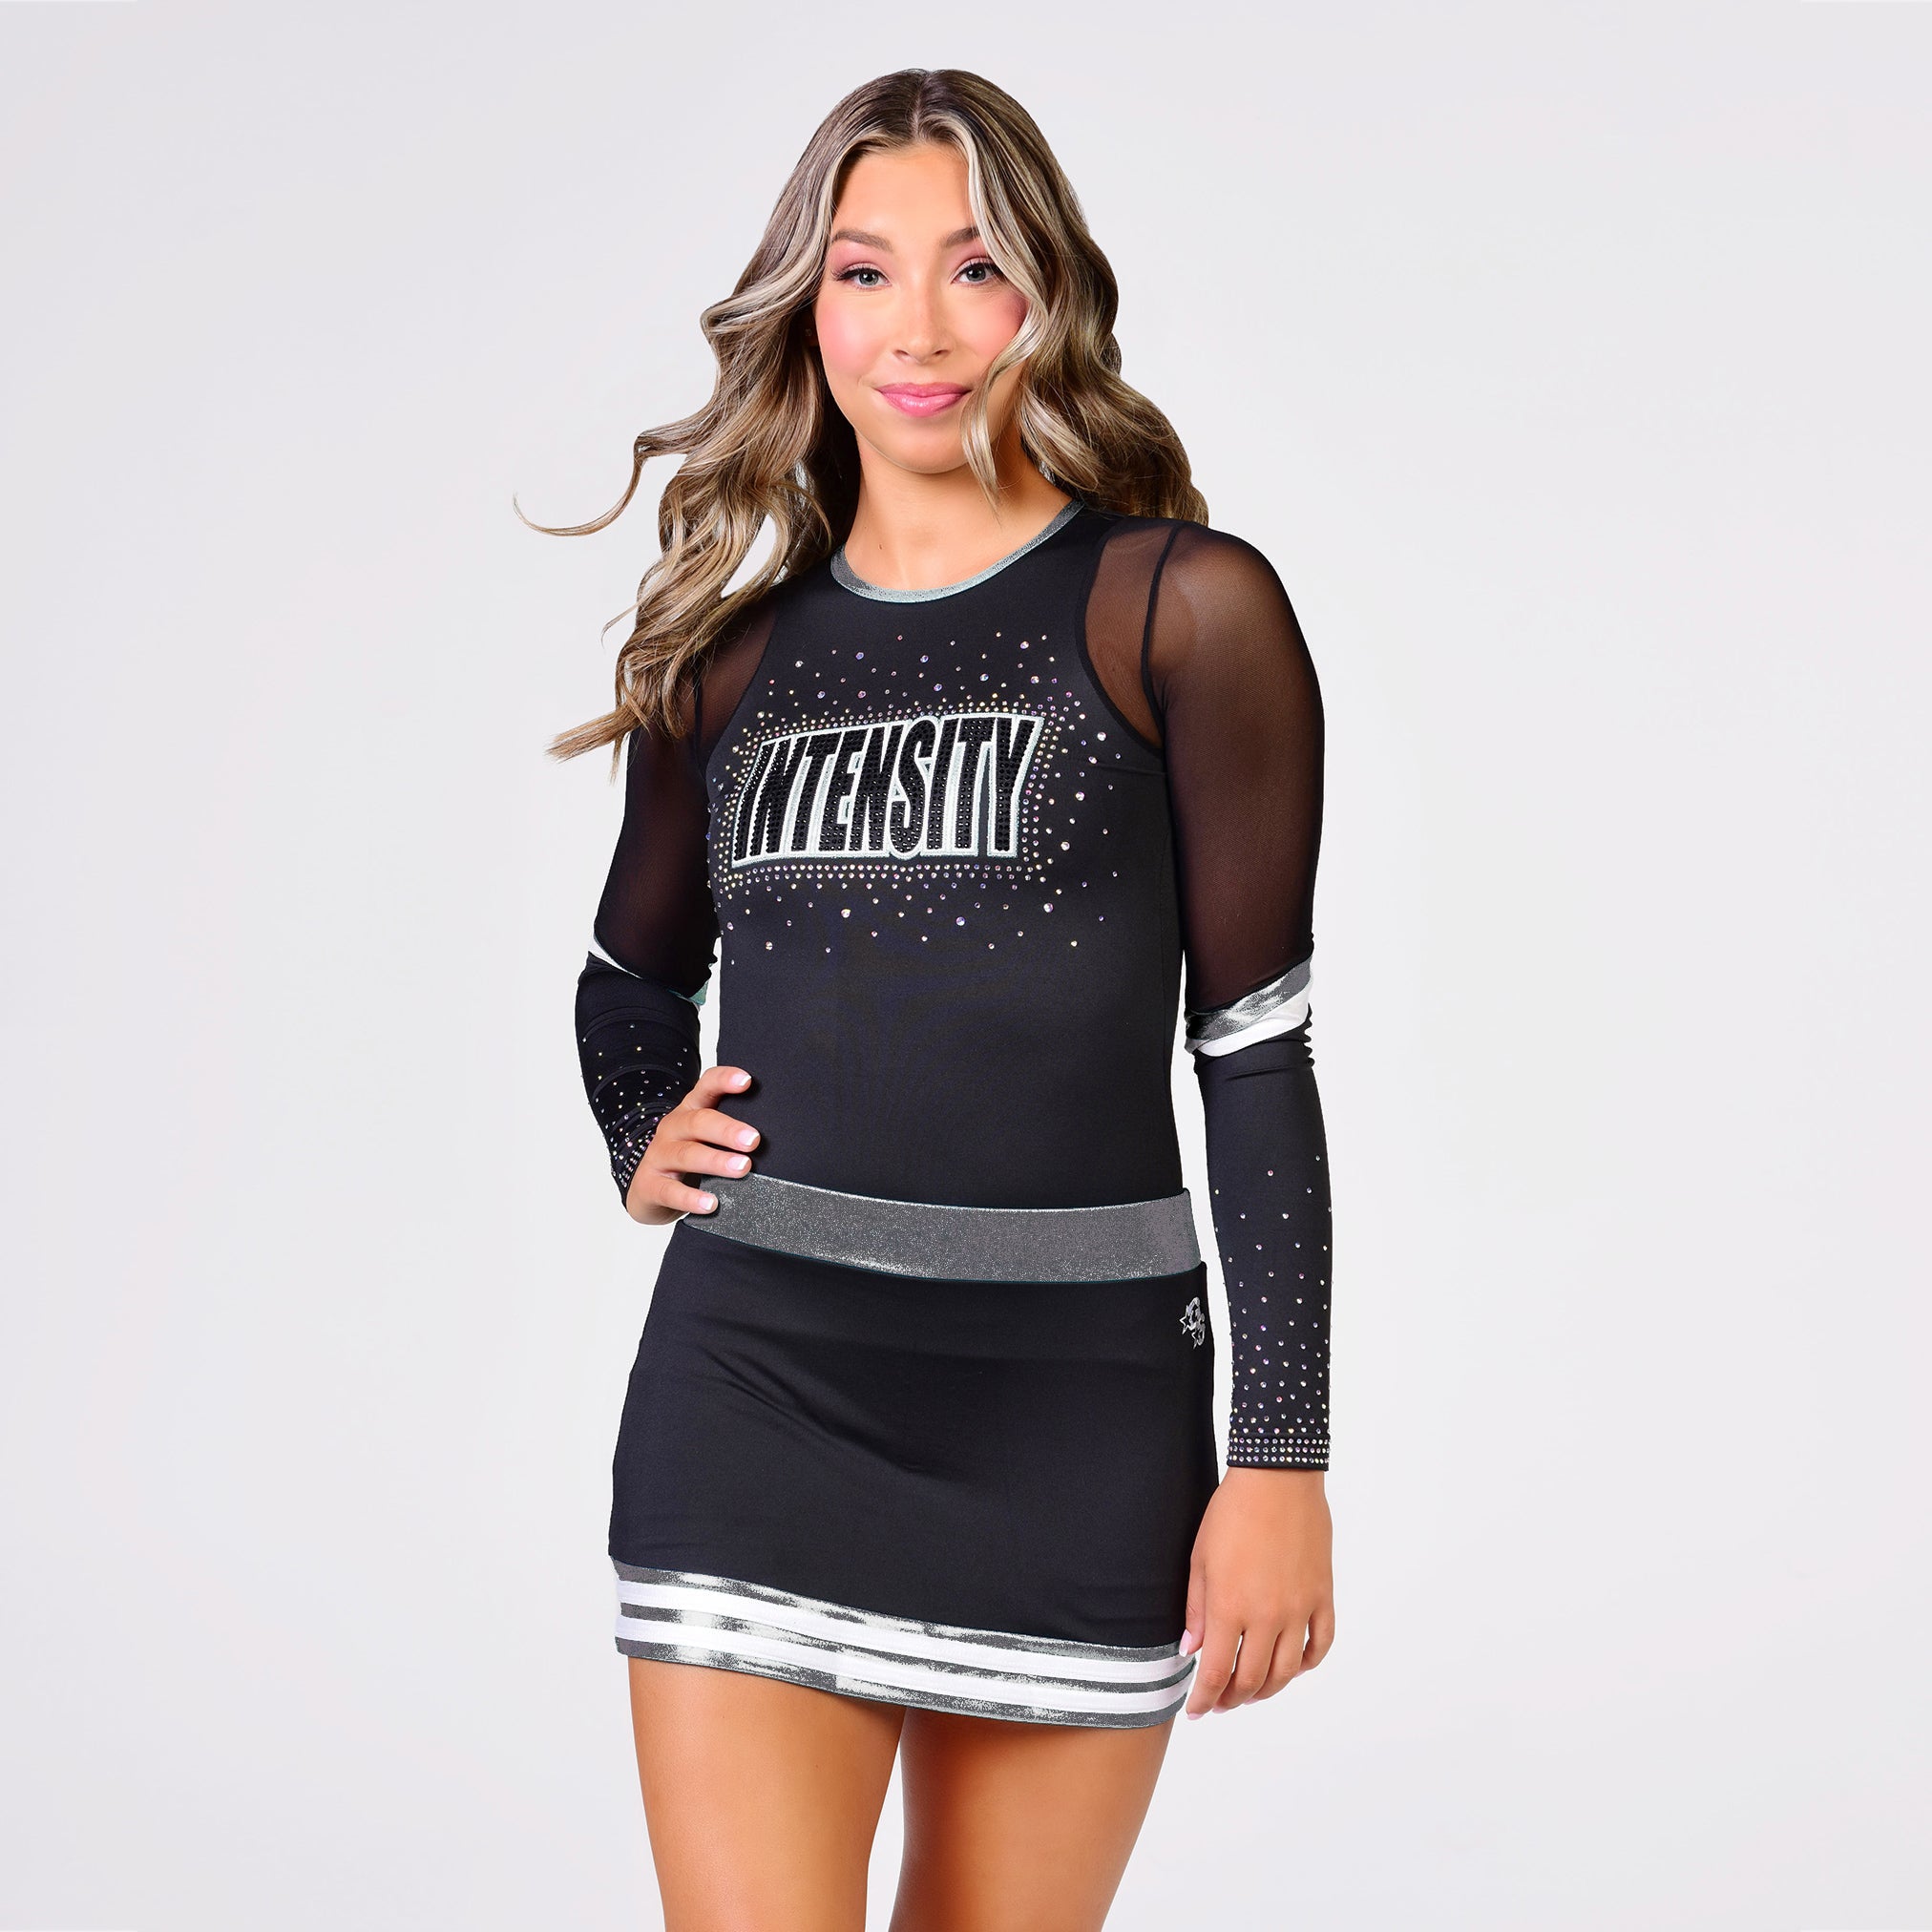 Journey Uniform with Closed Back - Grey